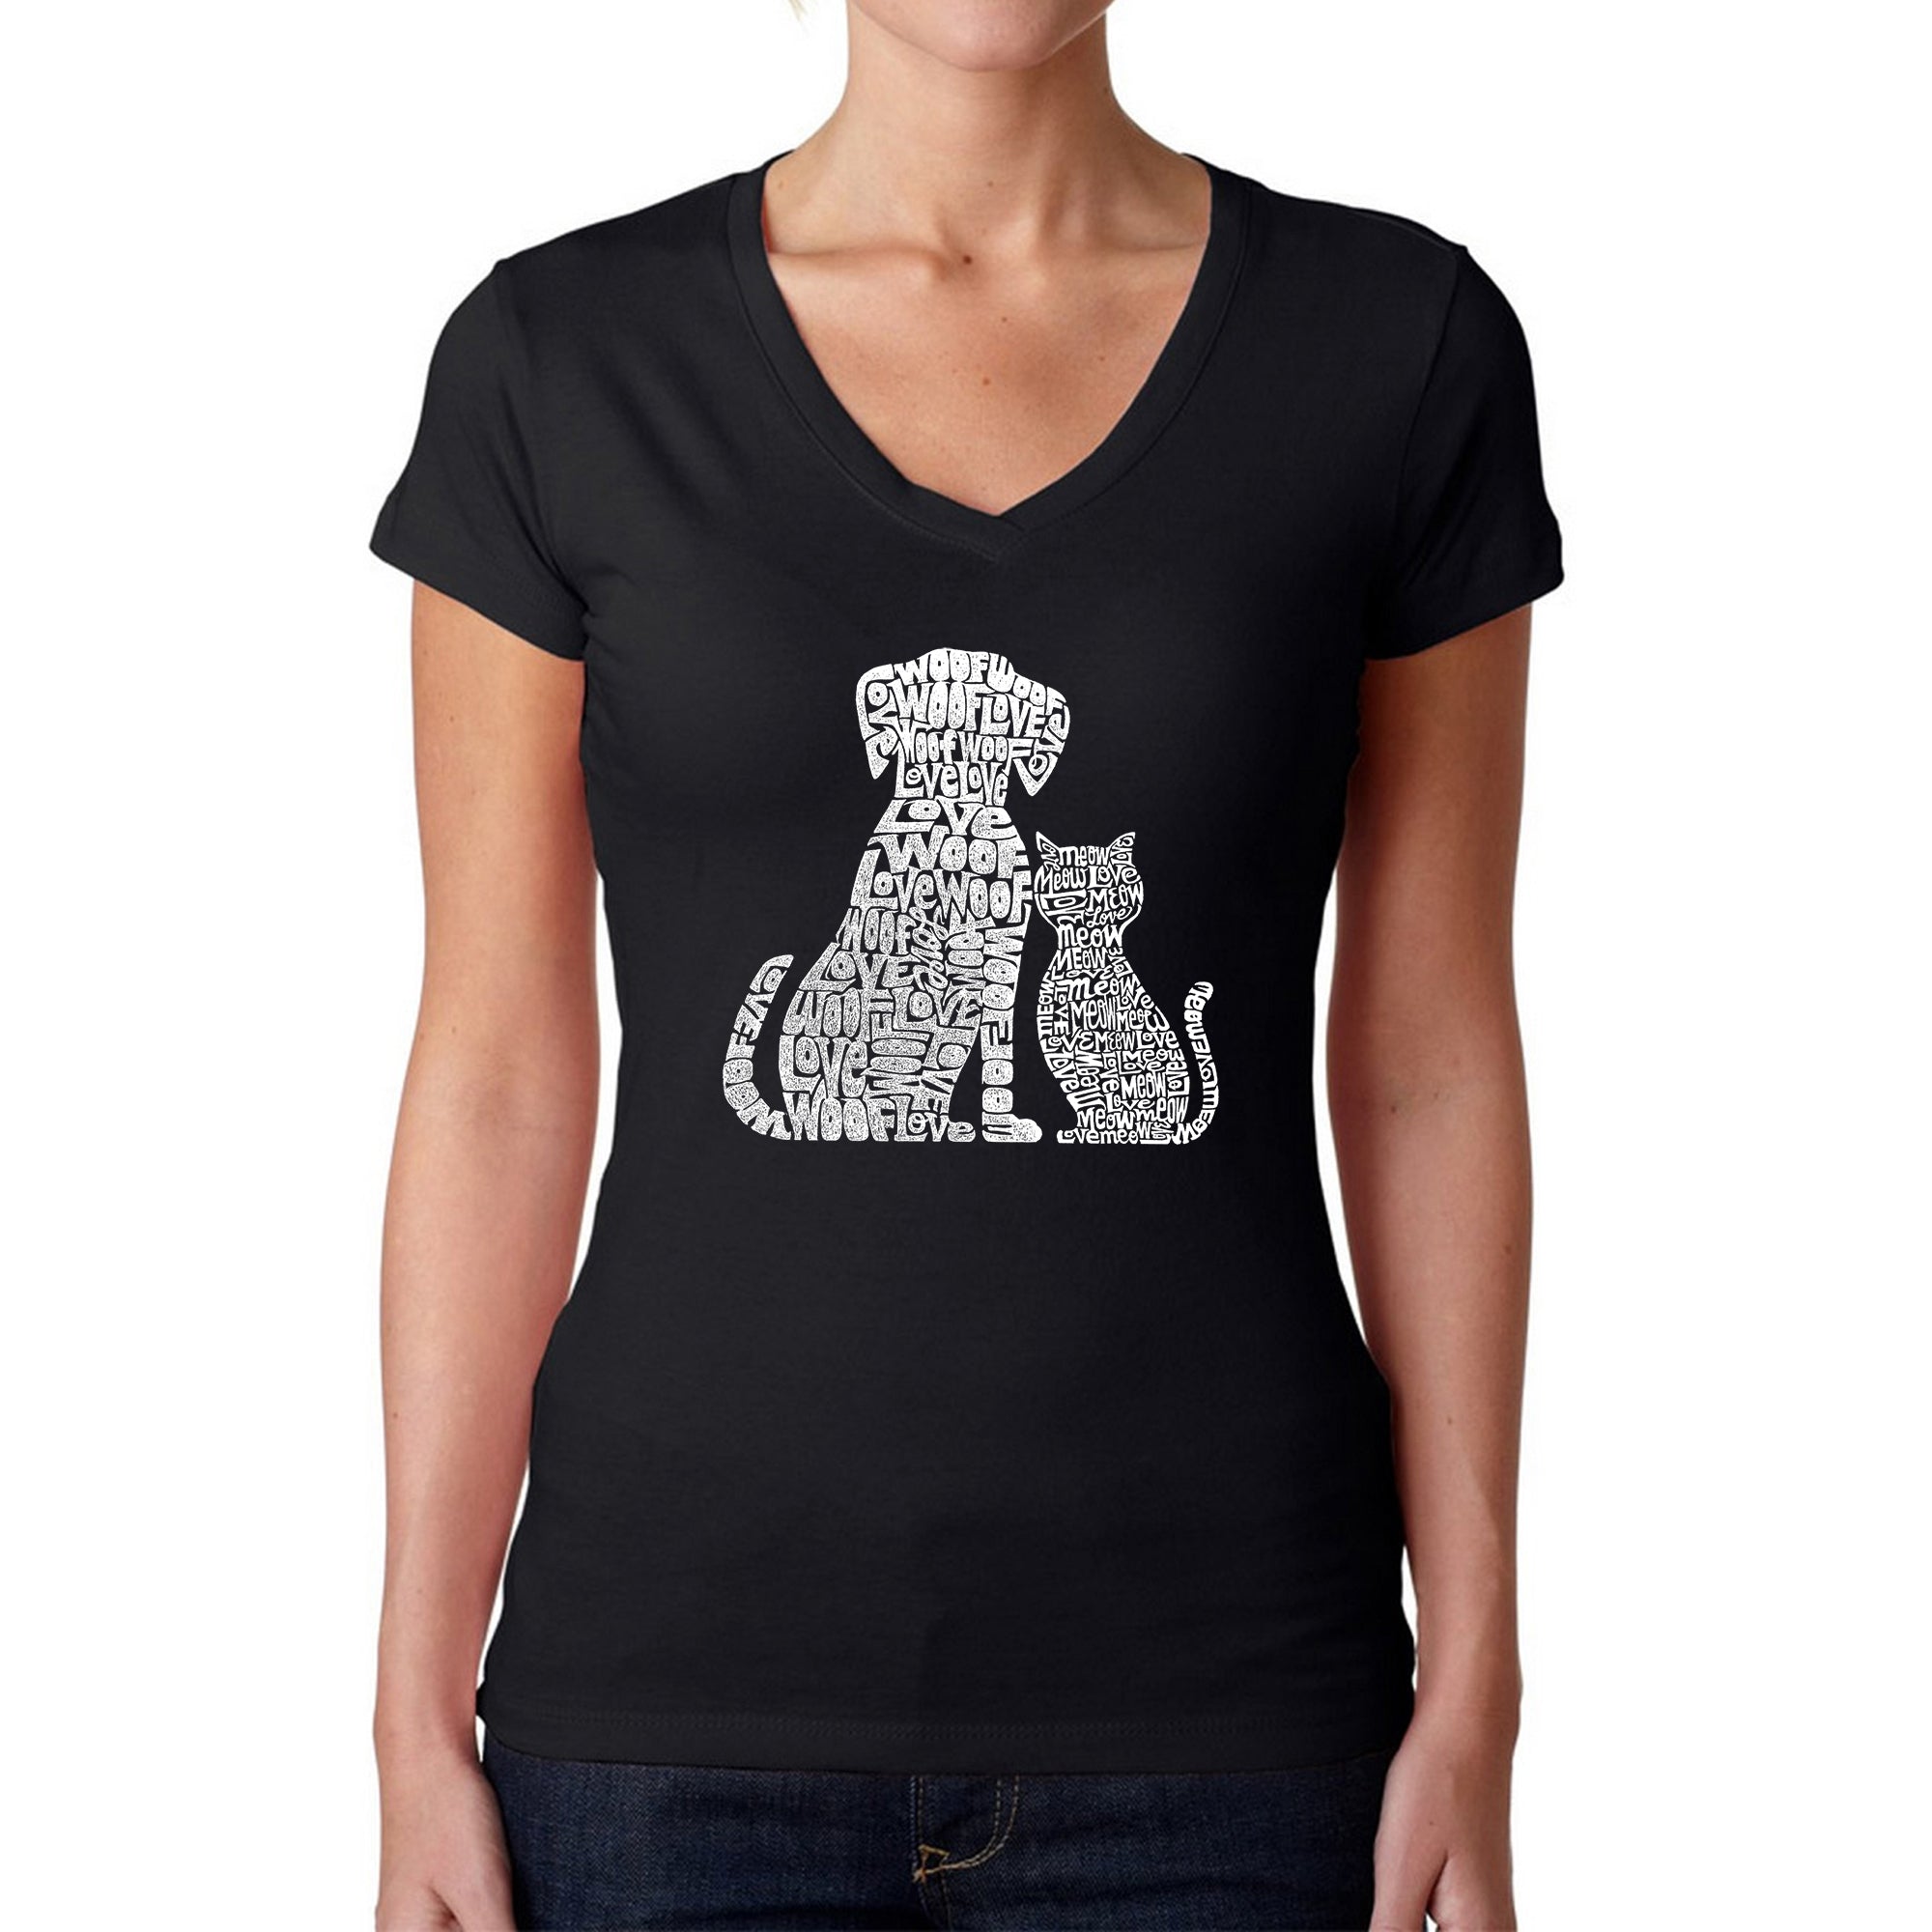 Dogs And Cats - Women's Word Art V-Neck T-Shirt - X-Large